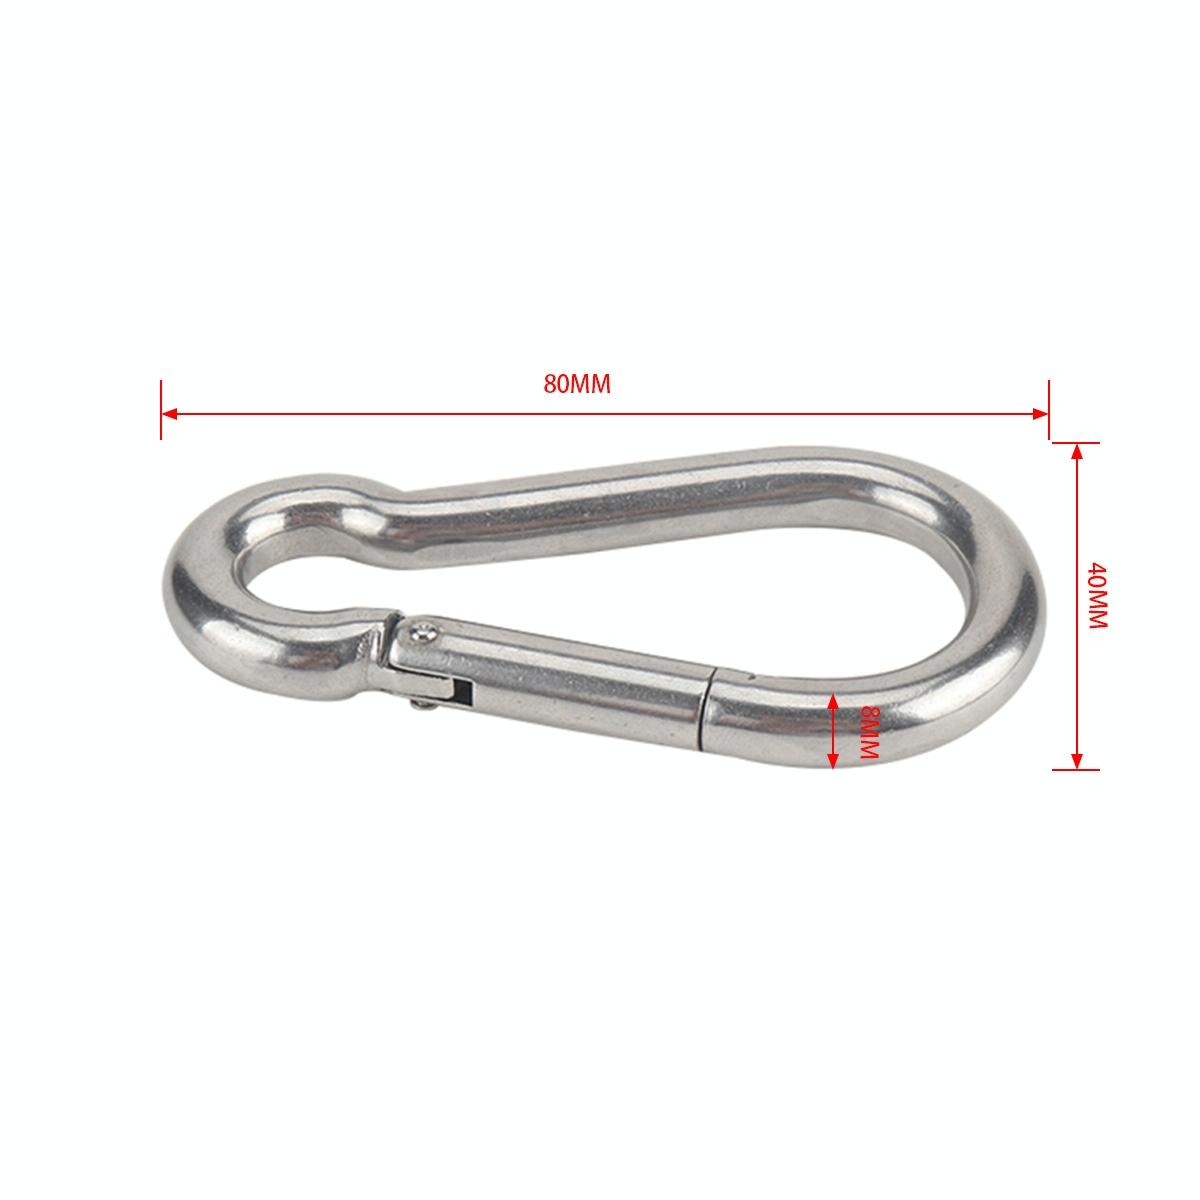 RV Trailer Spring Safety Rope Breakaway Cable, Safety Buckle Size:M8 x 80mm(Silver)